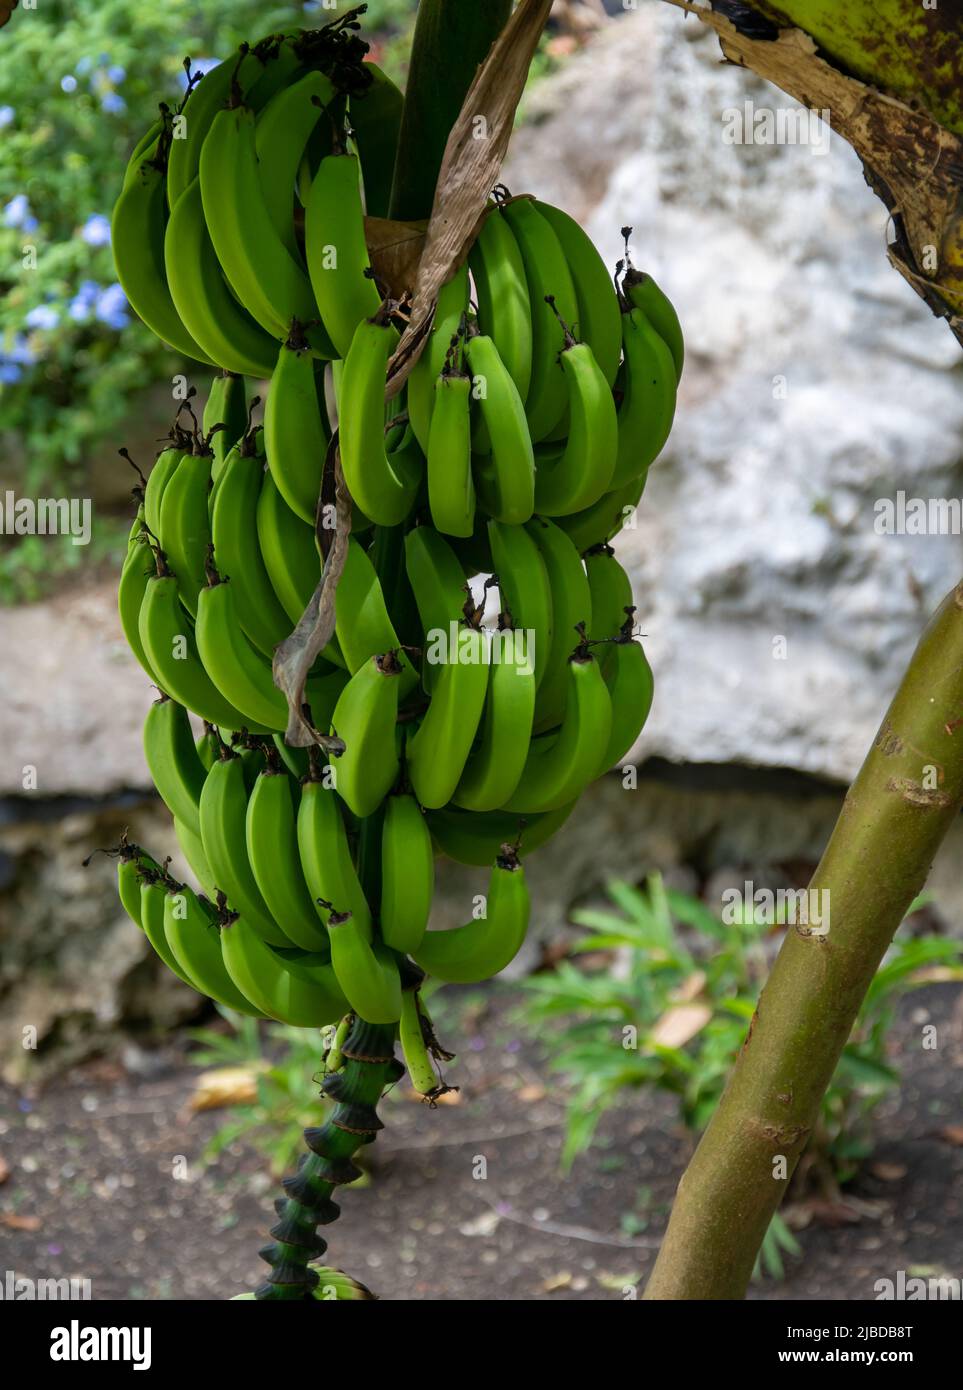 A bunch of bananas hanging from a banana tree Stock Photo